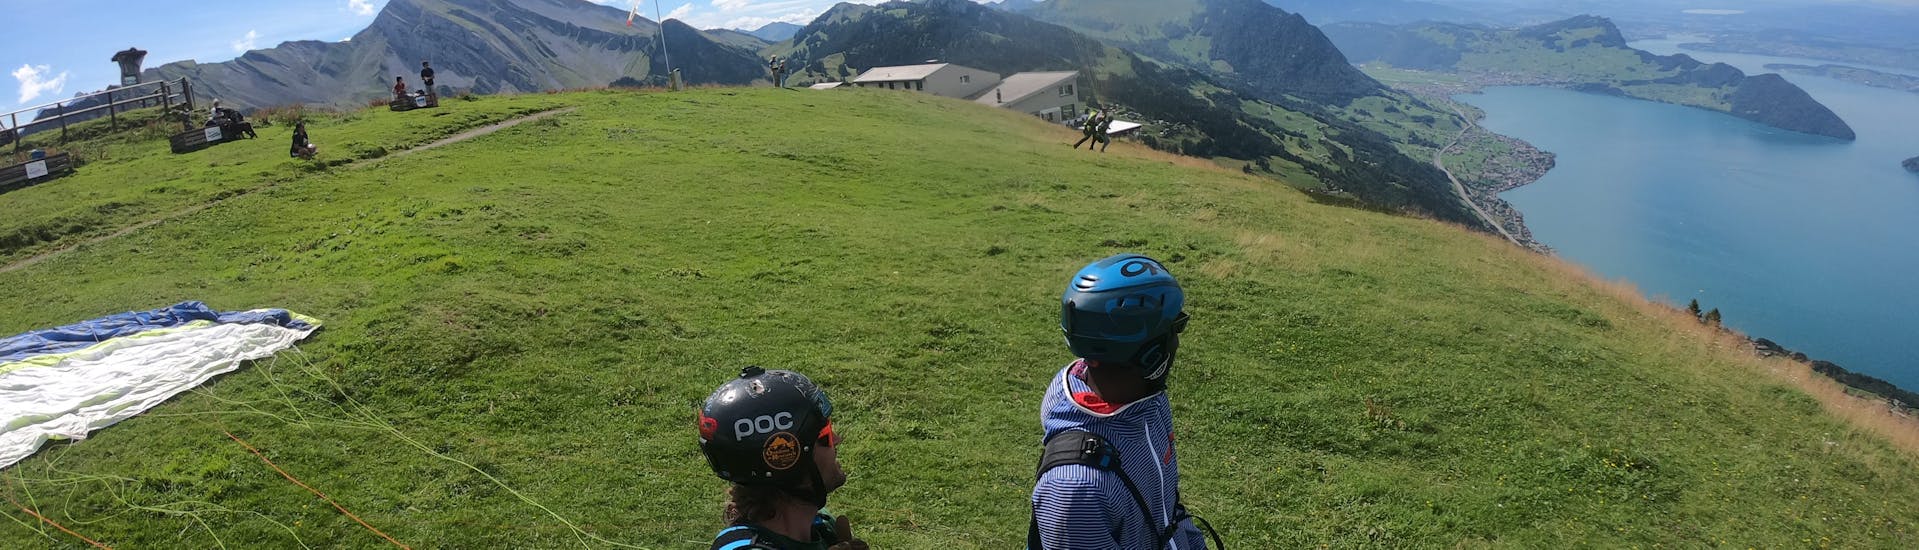 Two persons enjoying the view at Tandem Paragliding from the Niederbauen - Groups with SkyGlide Emmetten-Lucerne.